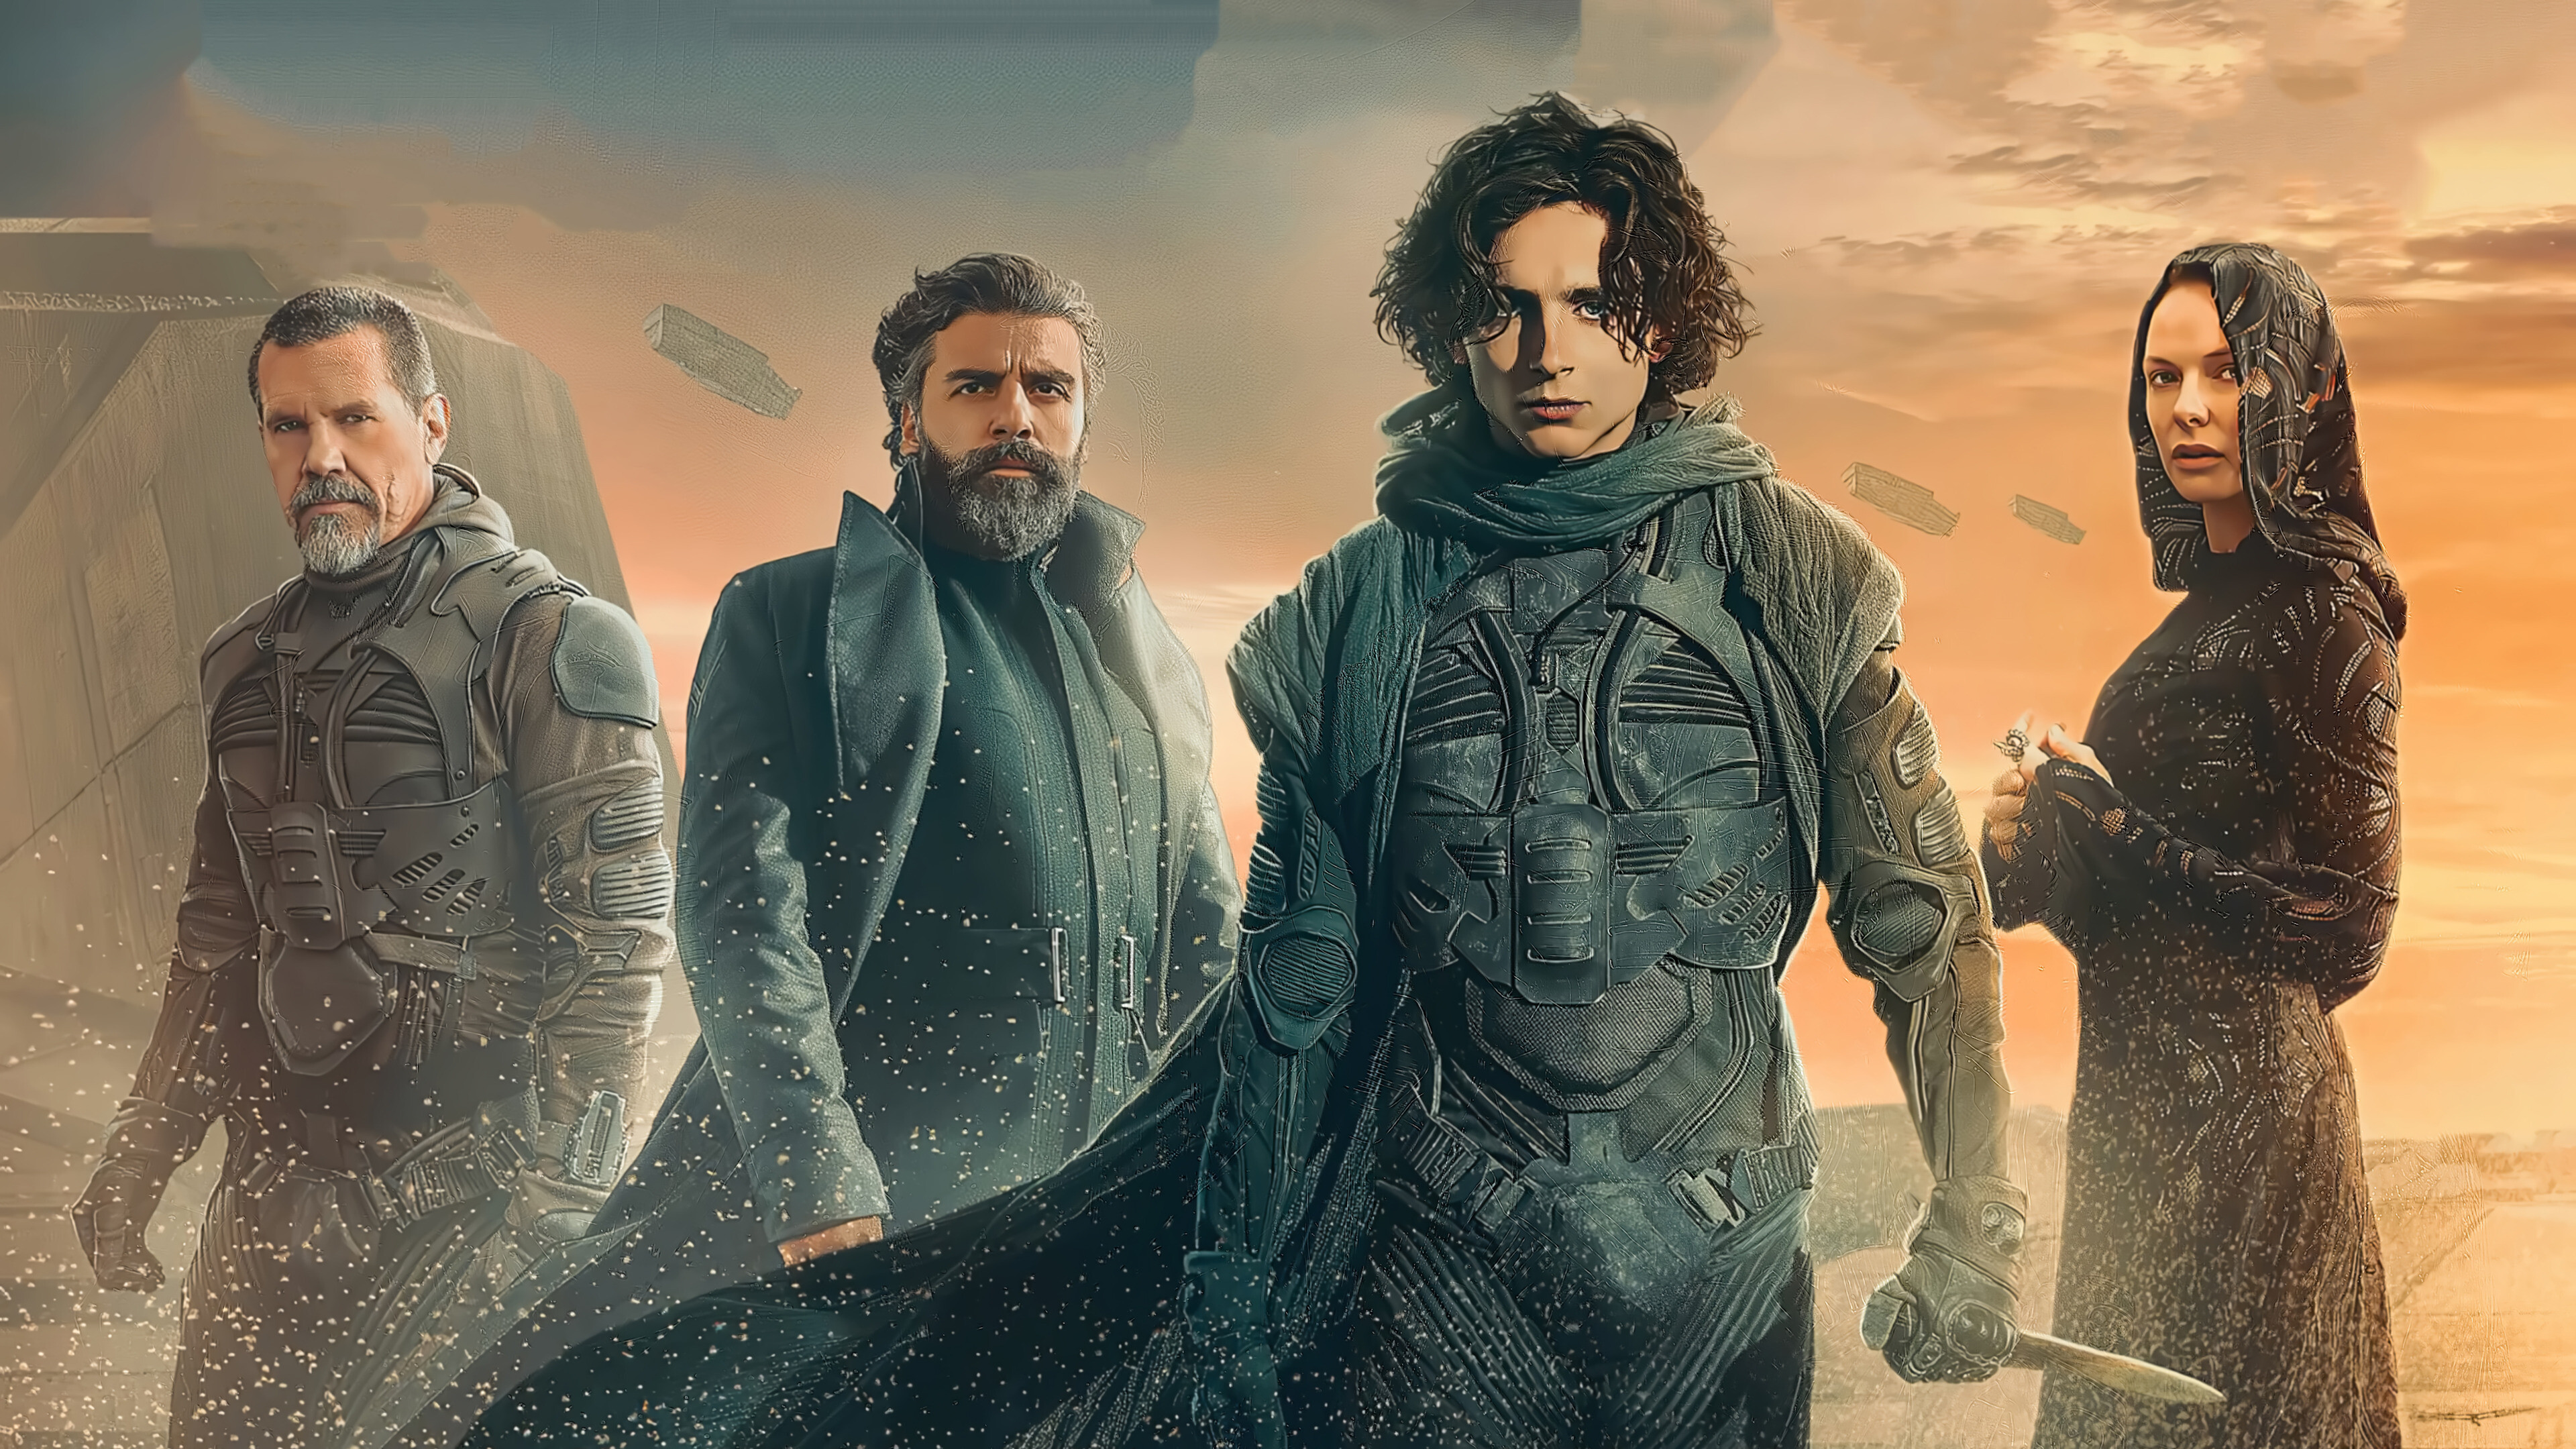 Dune (2021): Set in the distant future, the film follows Paul Atreides as his family, the noble House Atreides, is thrust into a war for the deadly and inhospitable desert planet Arrakis. 3840x2160 4K Background.